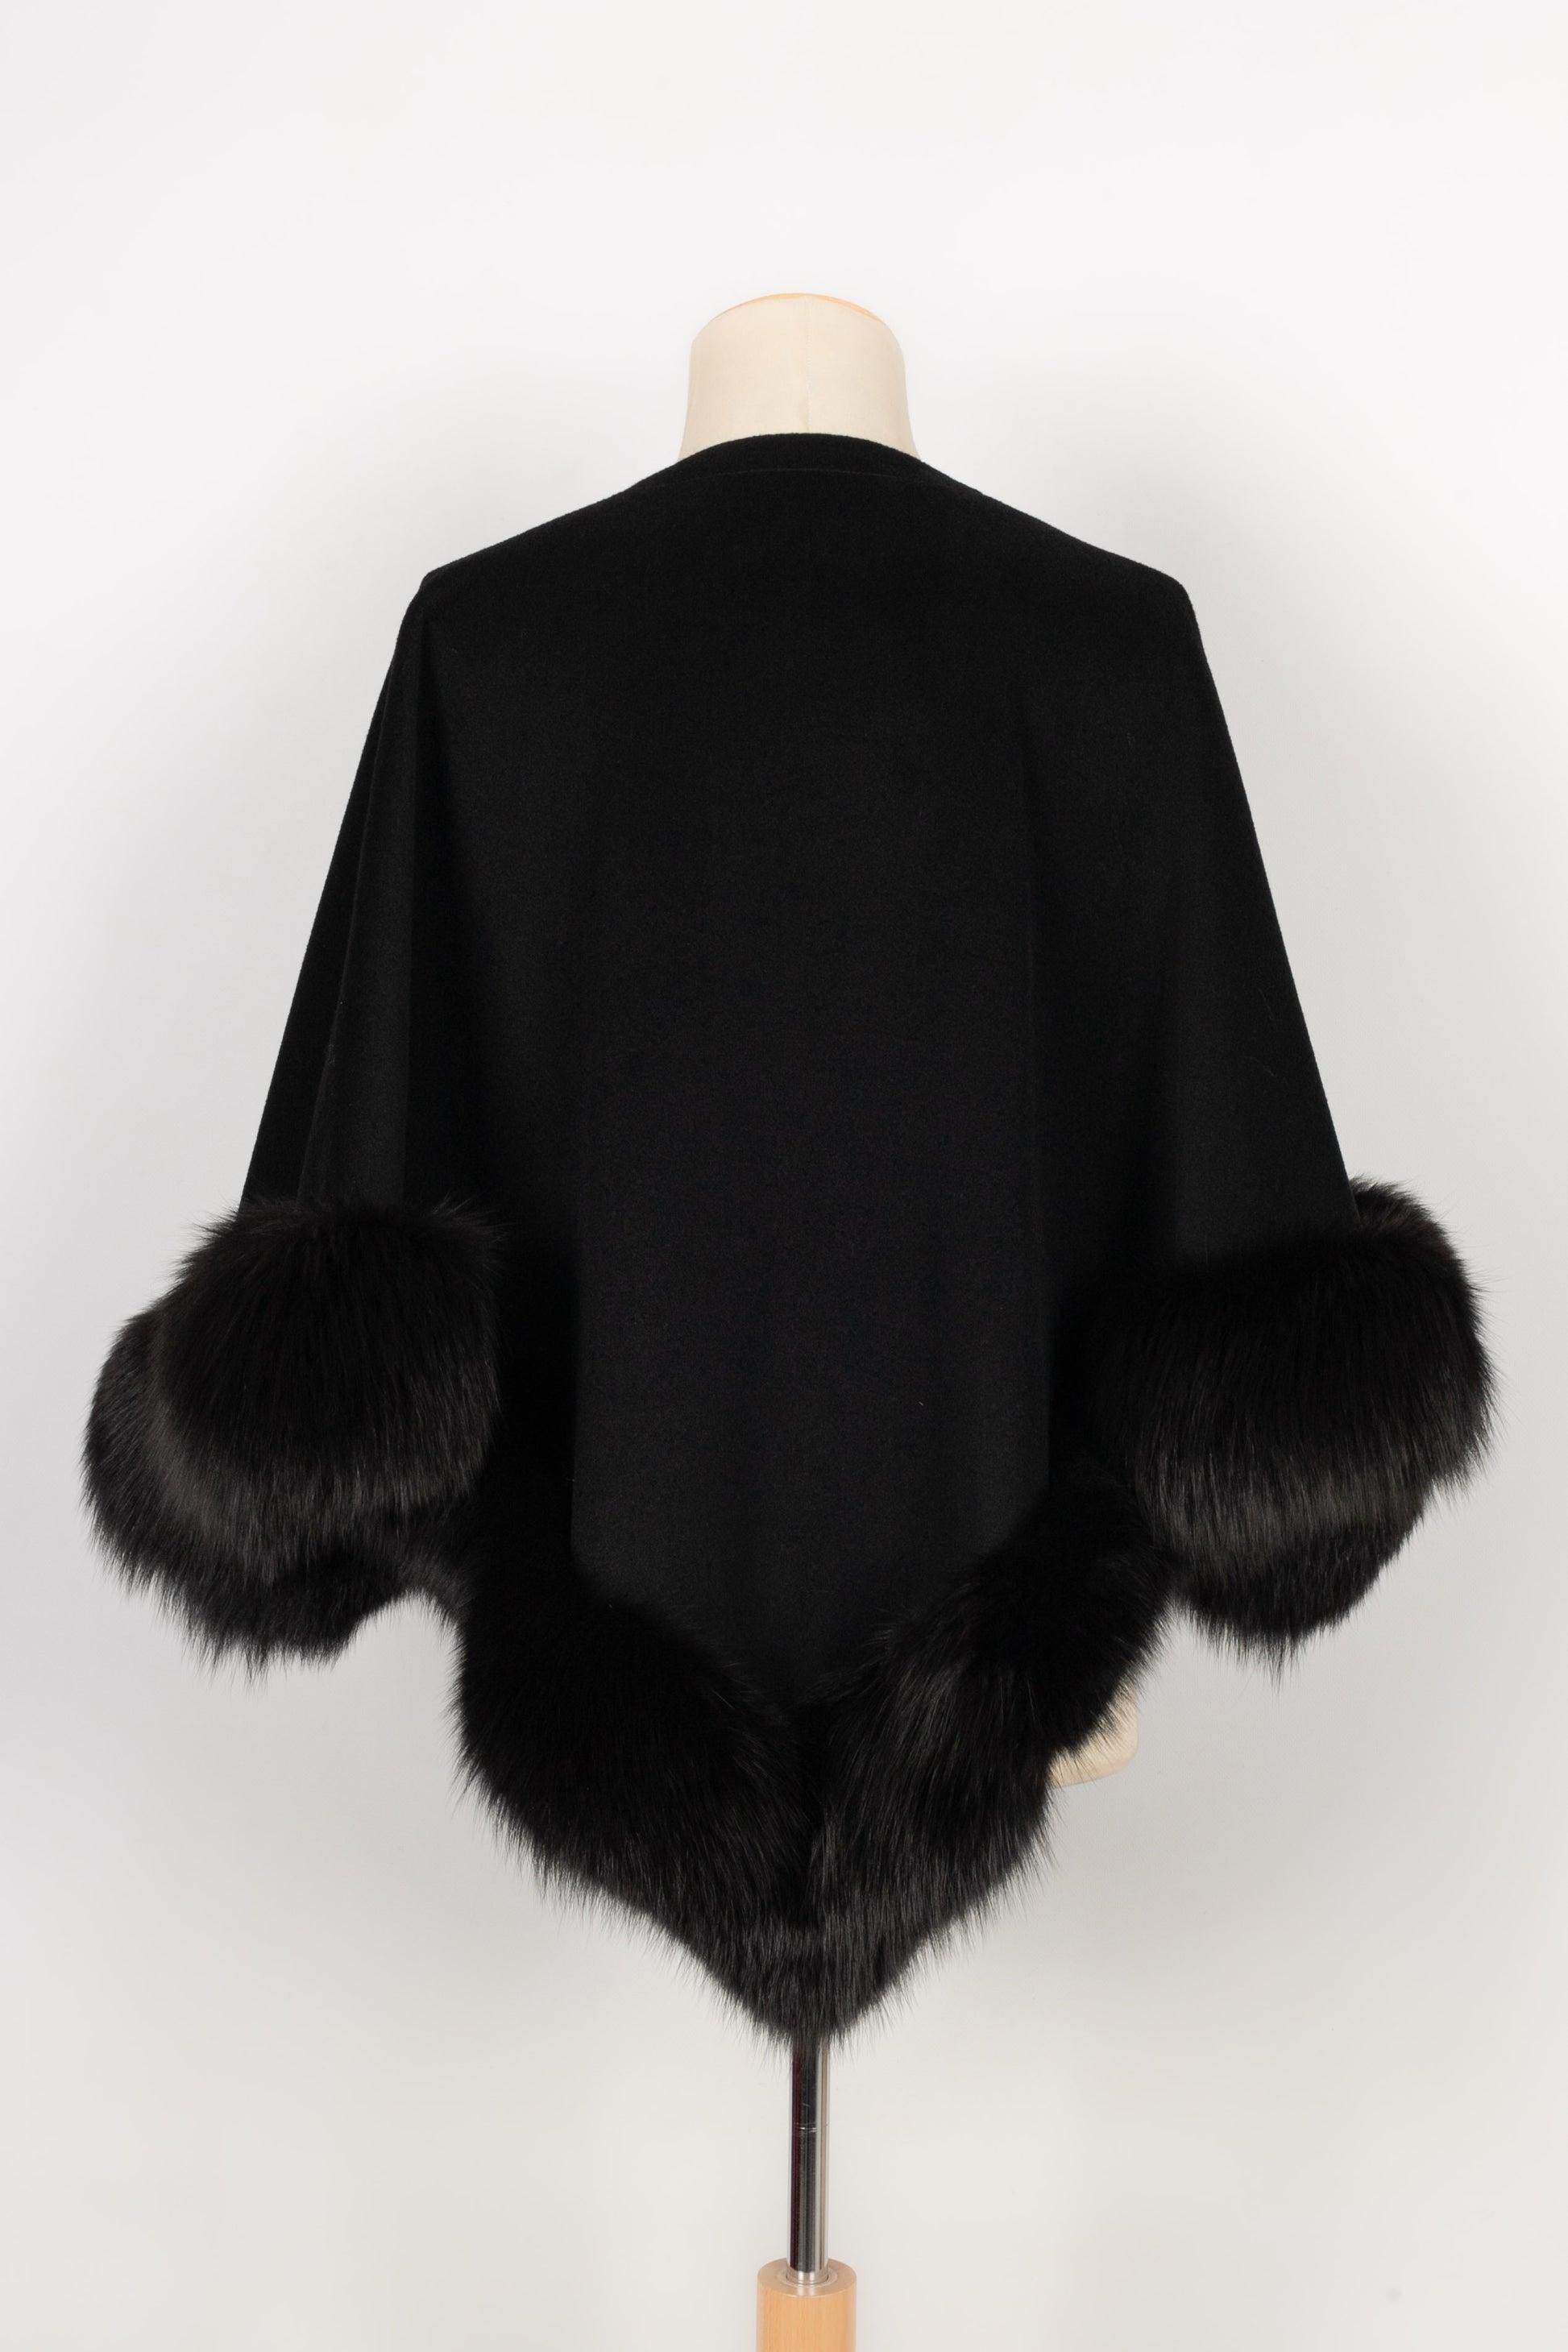 Guy Laroche Black Cape Embroidered with Fur In Excellent Condition For Sale In SAINT-OUEN-SUR-SEINE, FR